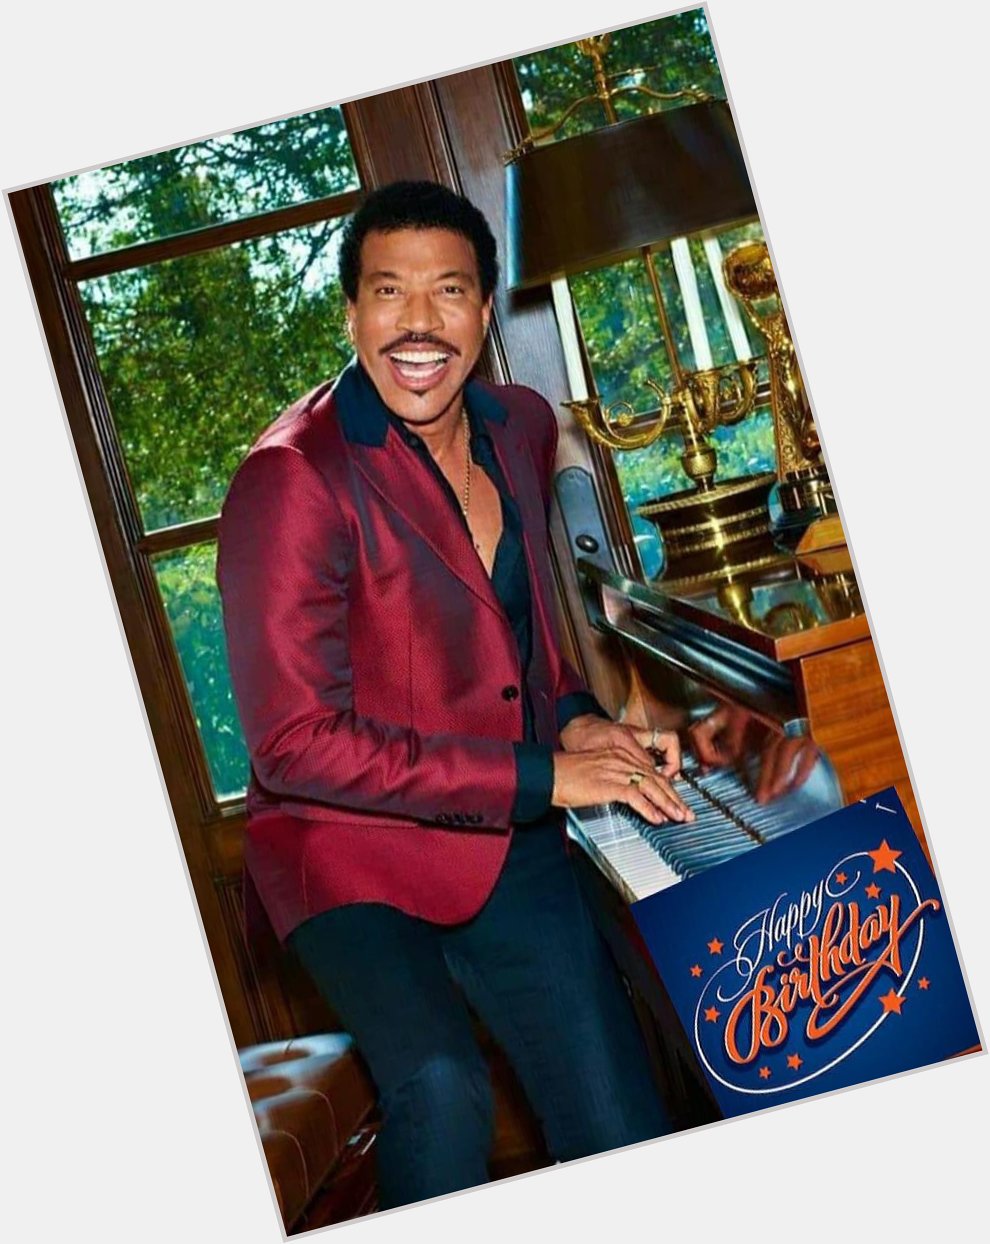 Happy 71st Birthday on June 20. 2020...LIONEL RICHIE
Lets celebrate it together everybody here! \ 